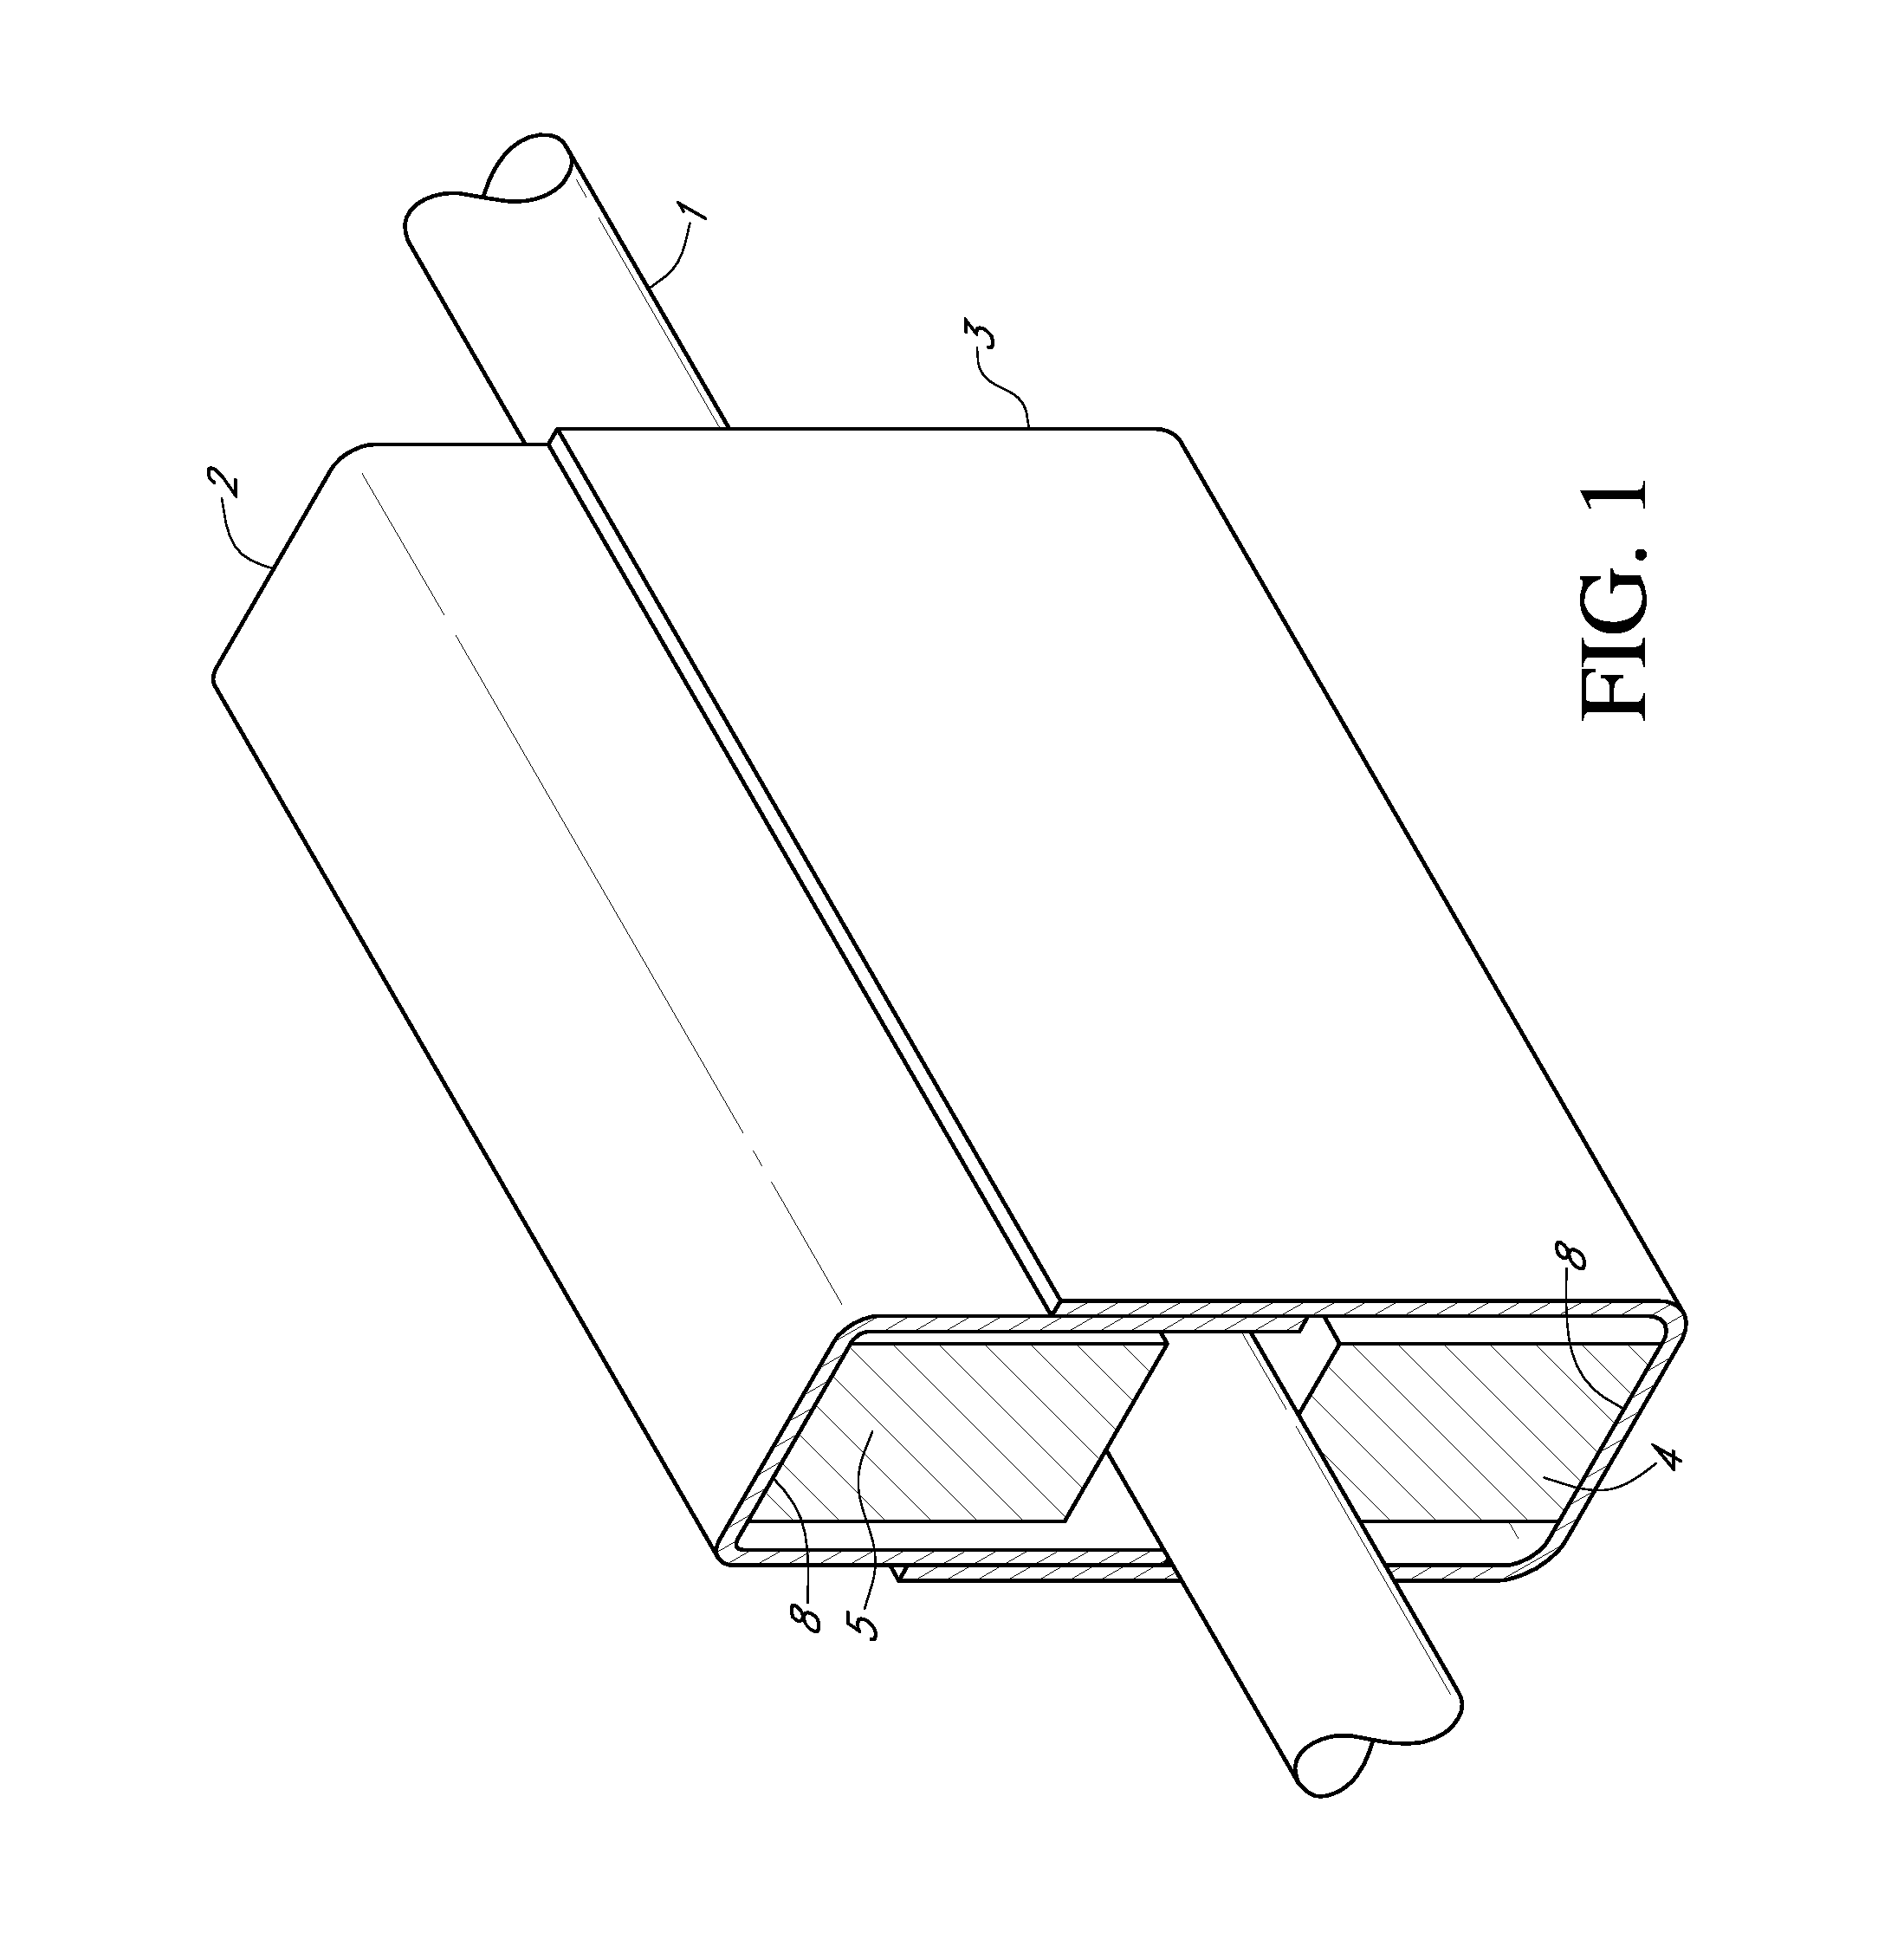 Apparatus and method for magnetically treating fluids